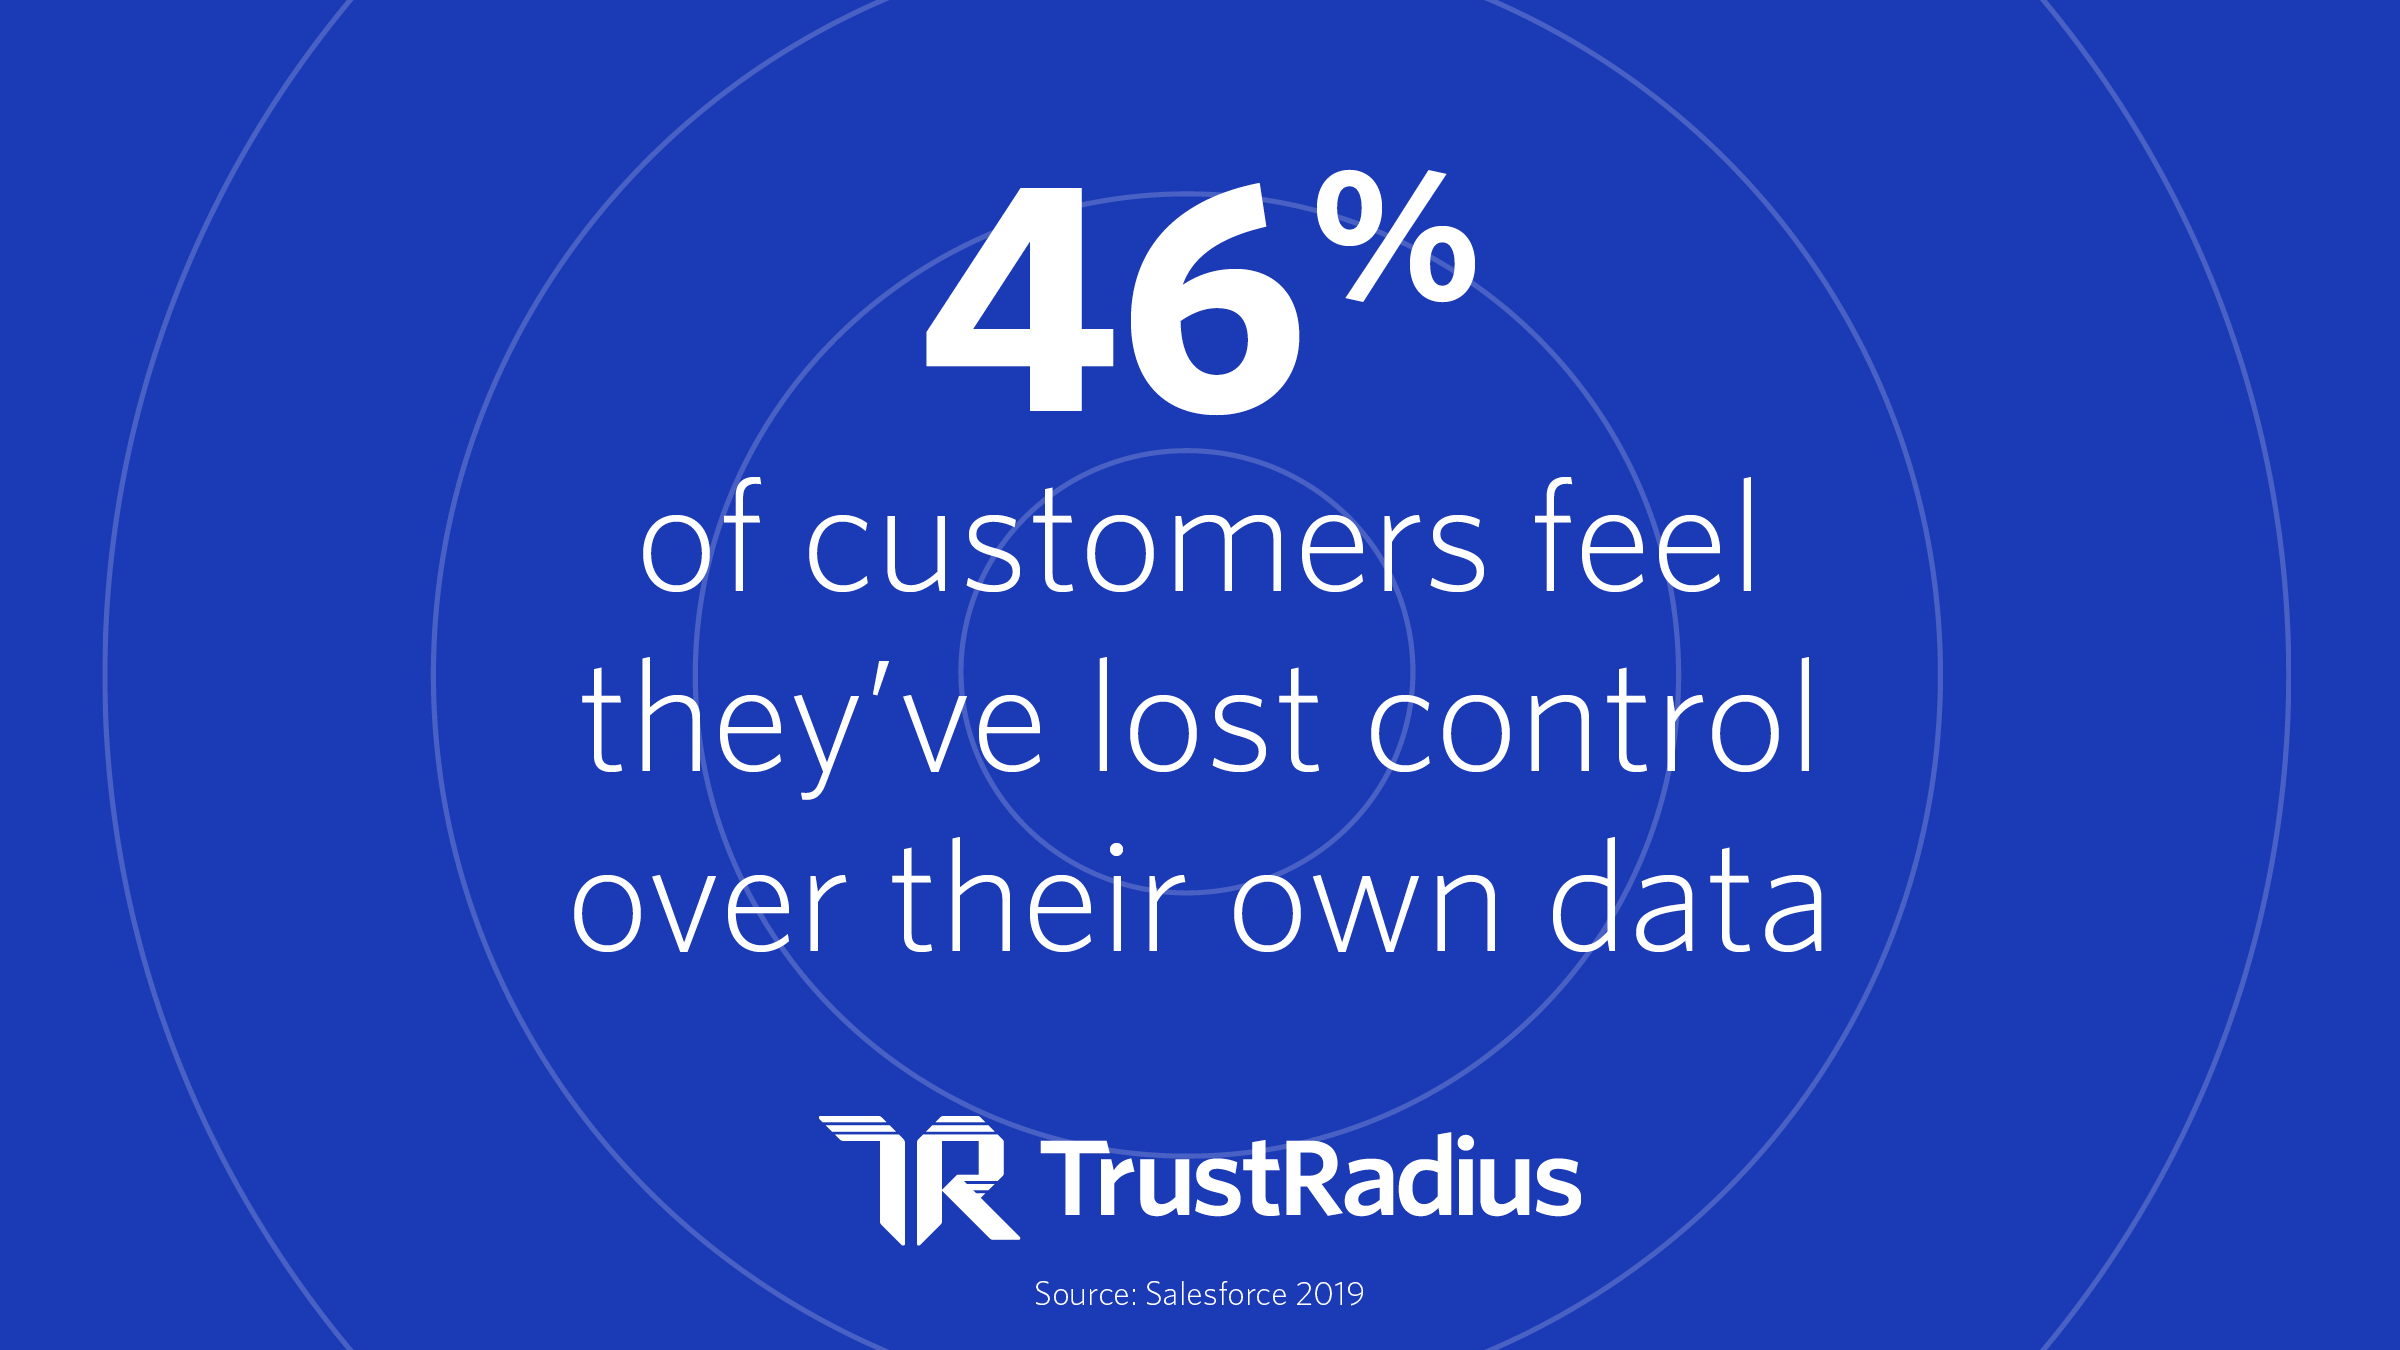 46% of customers feel they have lost control over their own data